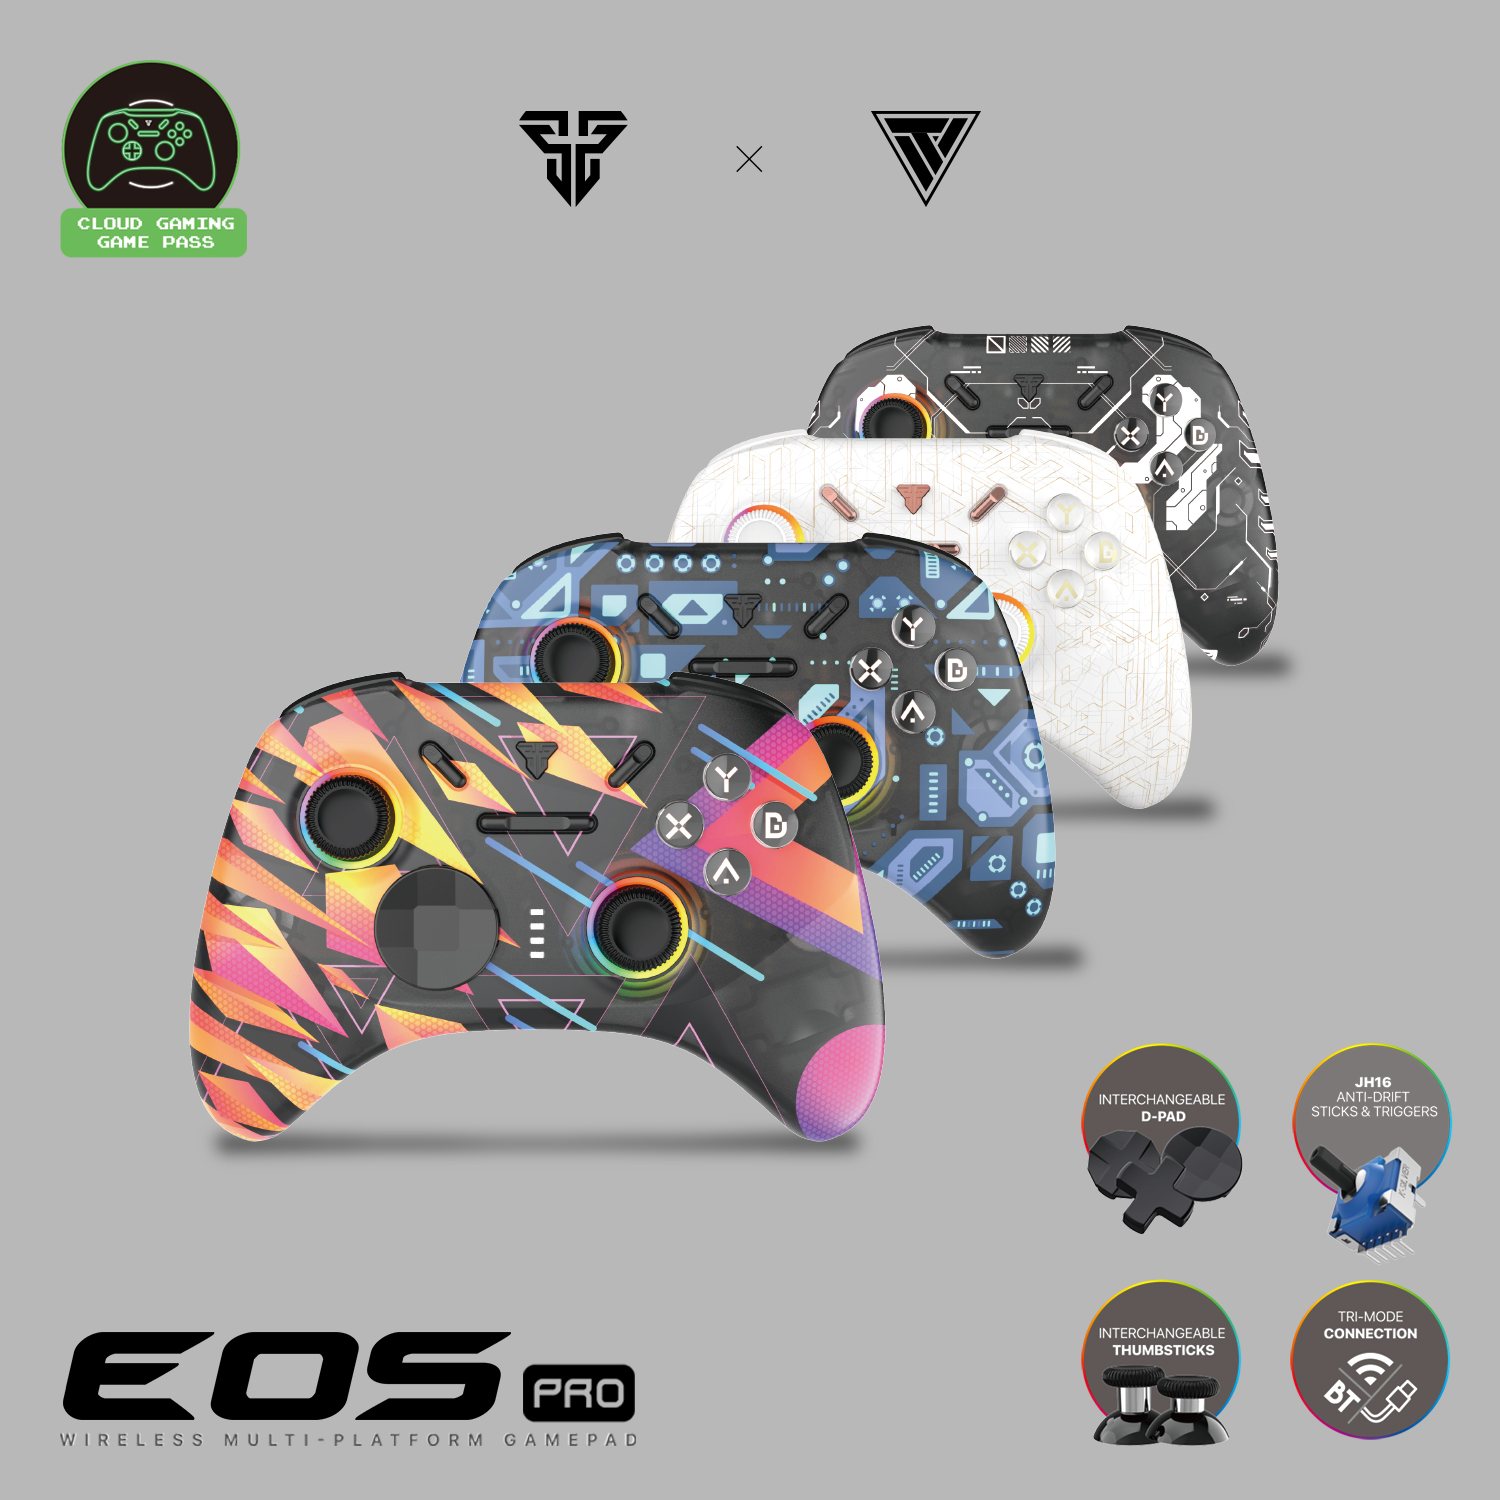 A large marketing image providing additional information about the product Fantech EOS Pro Gamepad Wireless Multi-Platform Hall-Effect Game Controller - Rainbow - Additional alt info not provided